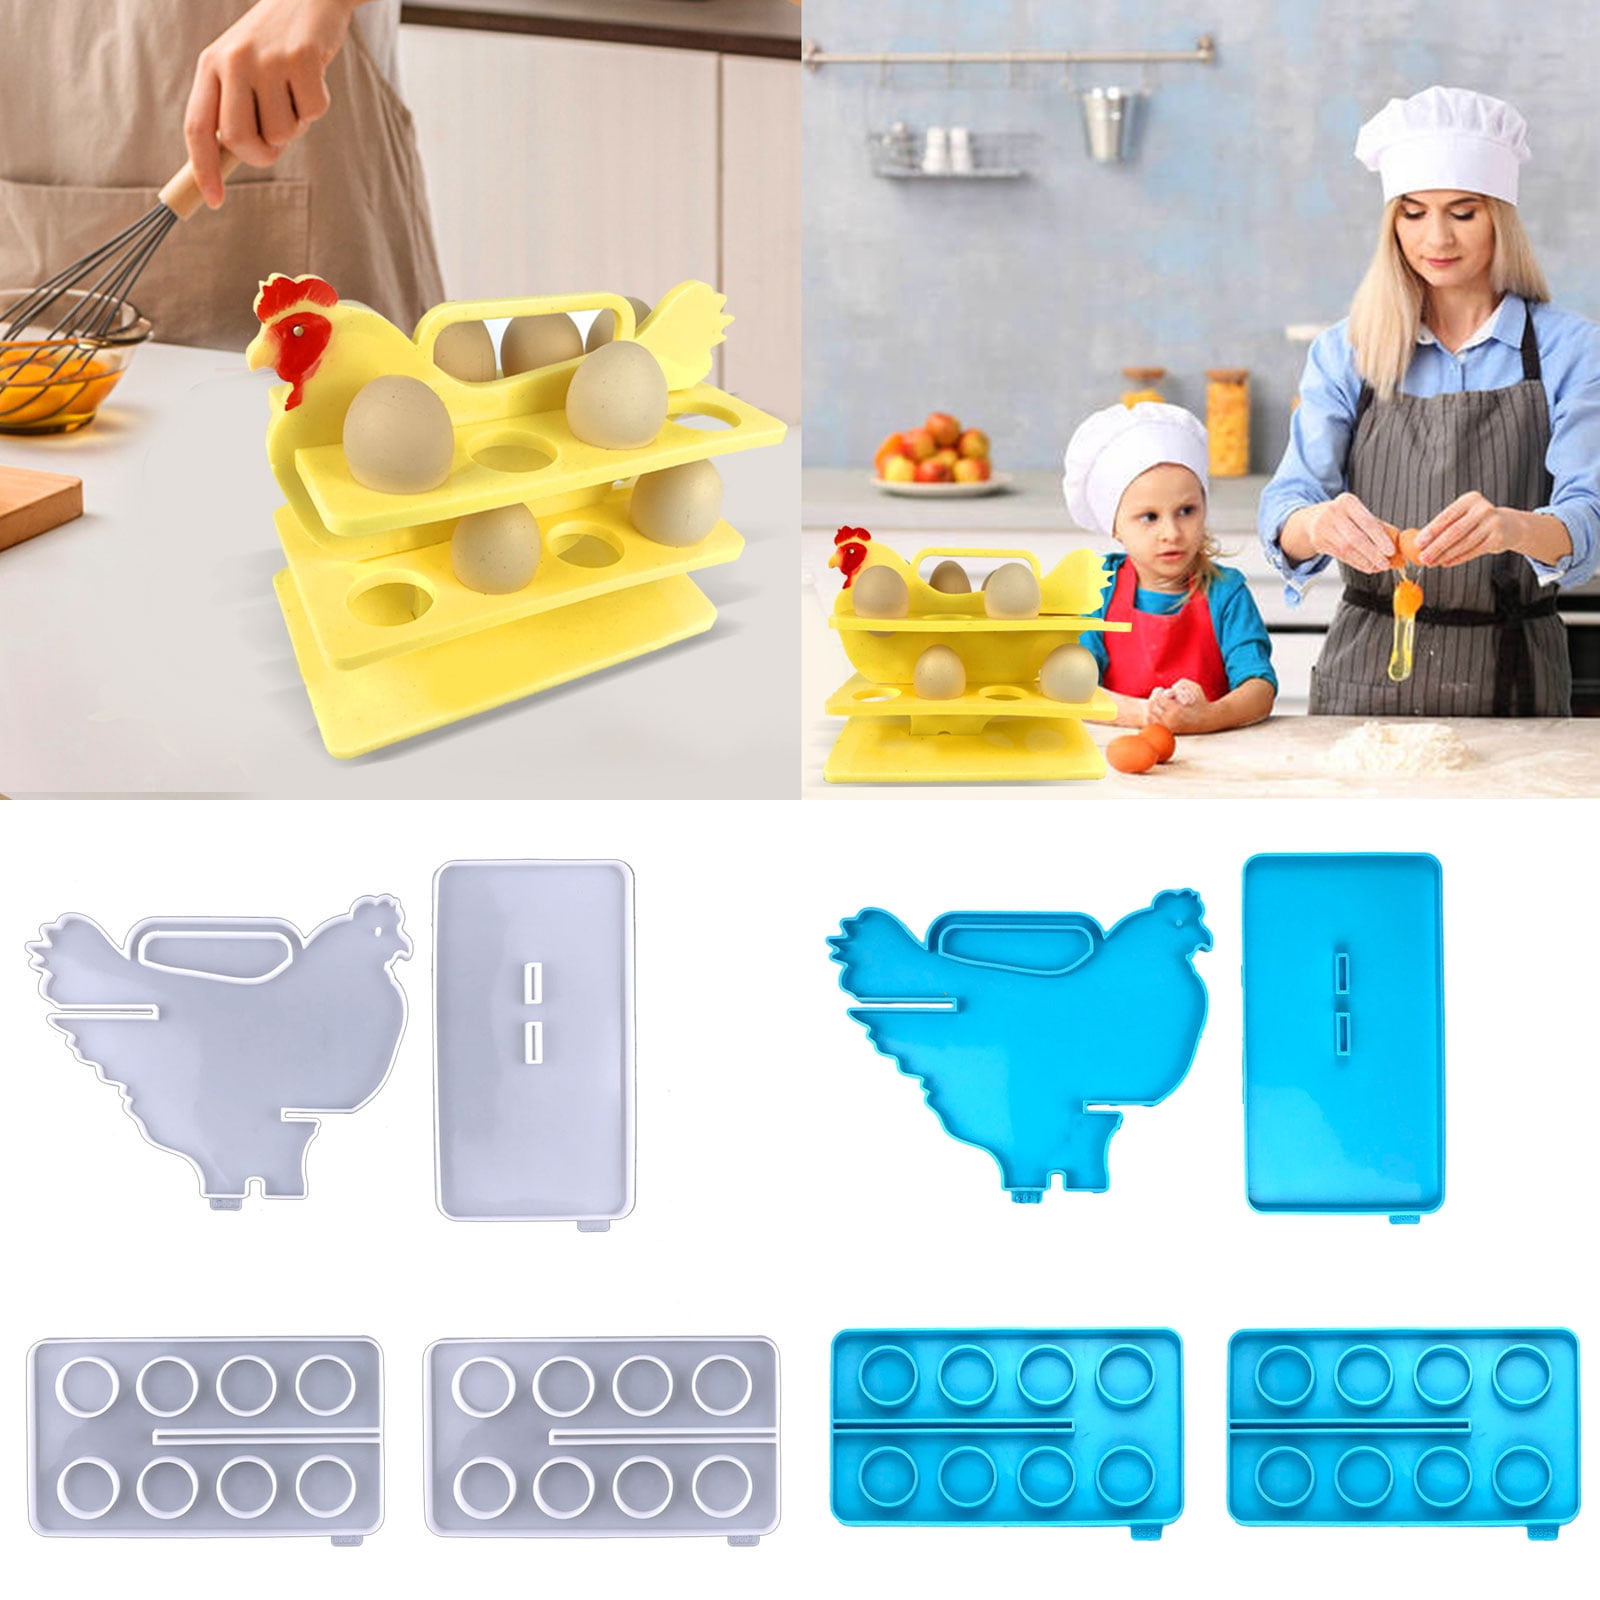 2 Pieces 6 Cups Egg Holder Silicone Resin Mold Egg Tray Rack Organizer Epoxy Silicone Casting Molds for Fridge, Refrigerator, Kitchen, Pantry, 3D